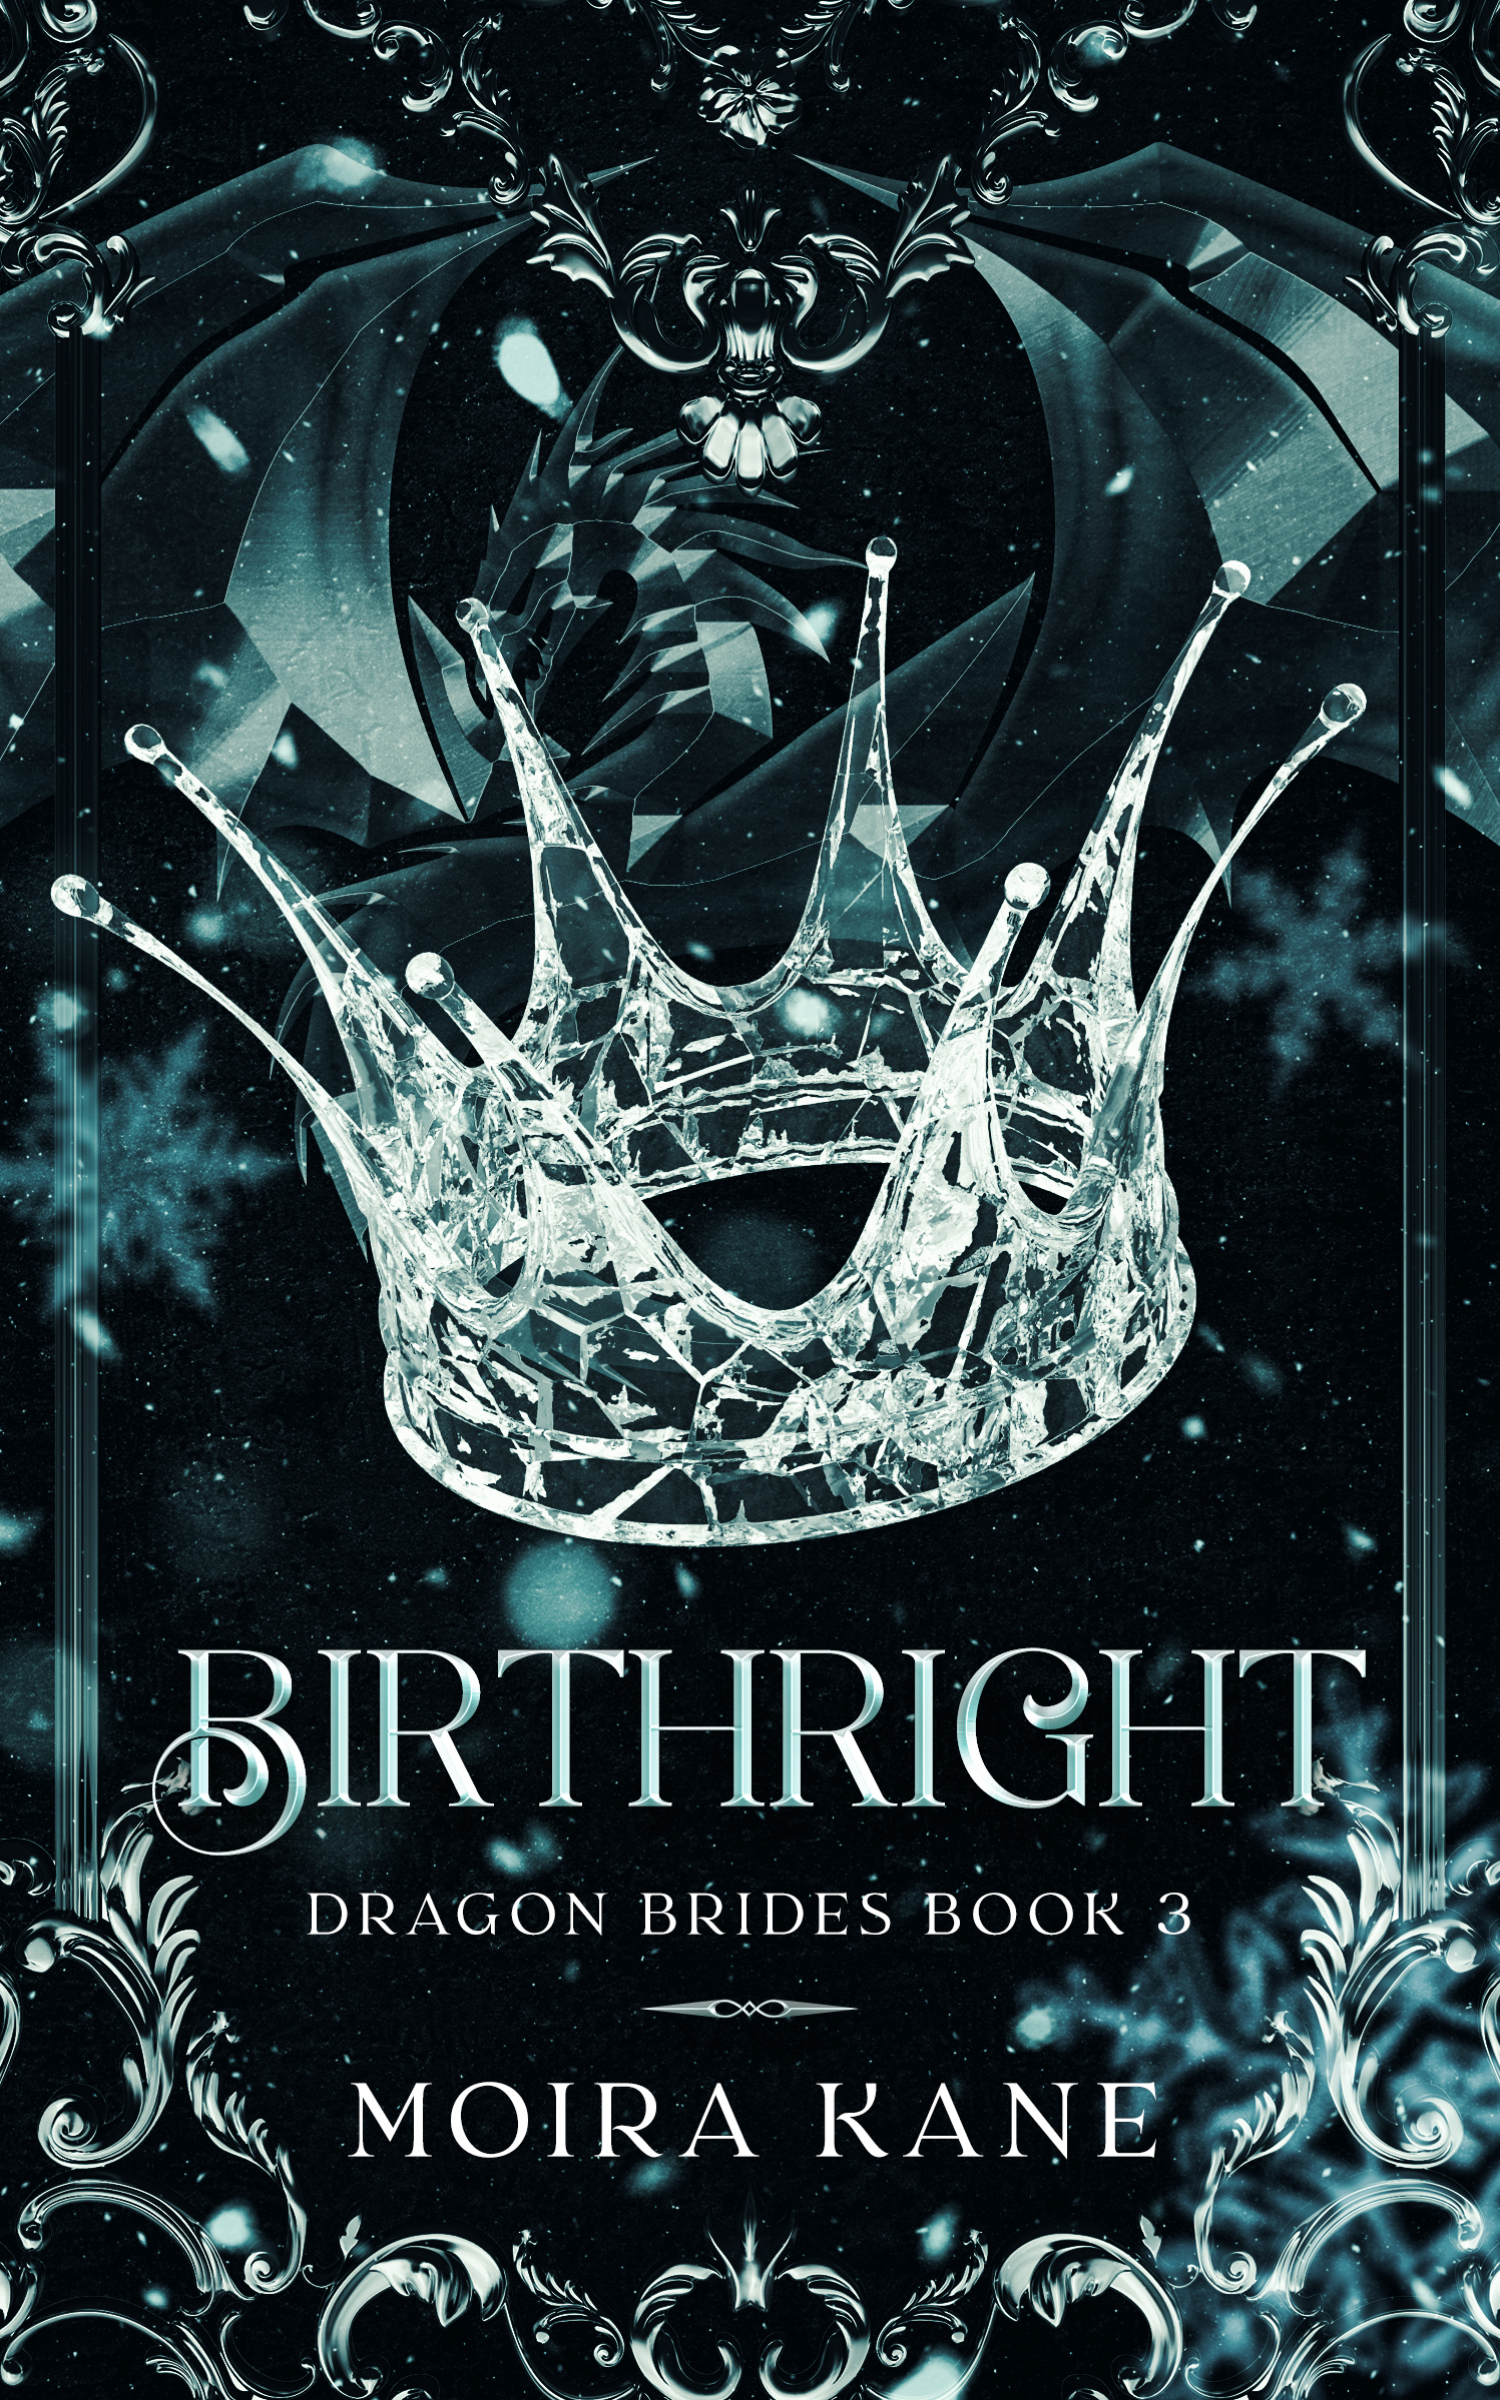 Glass crown with snowflakes in the background. Image text reads Birthright by Moira Kane